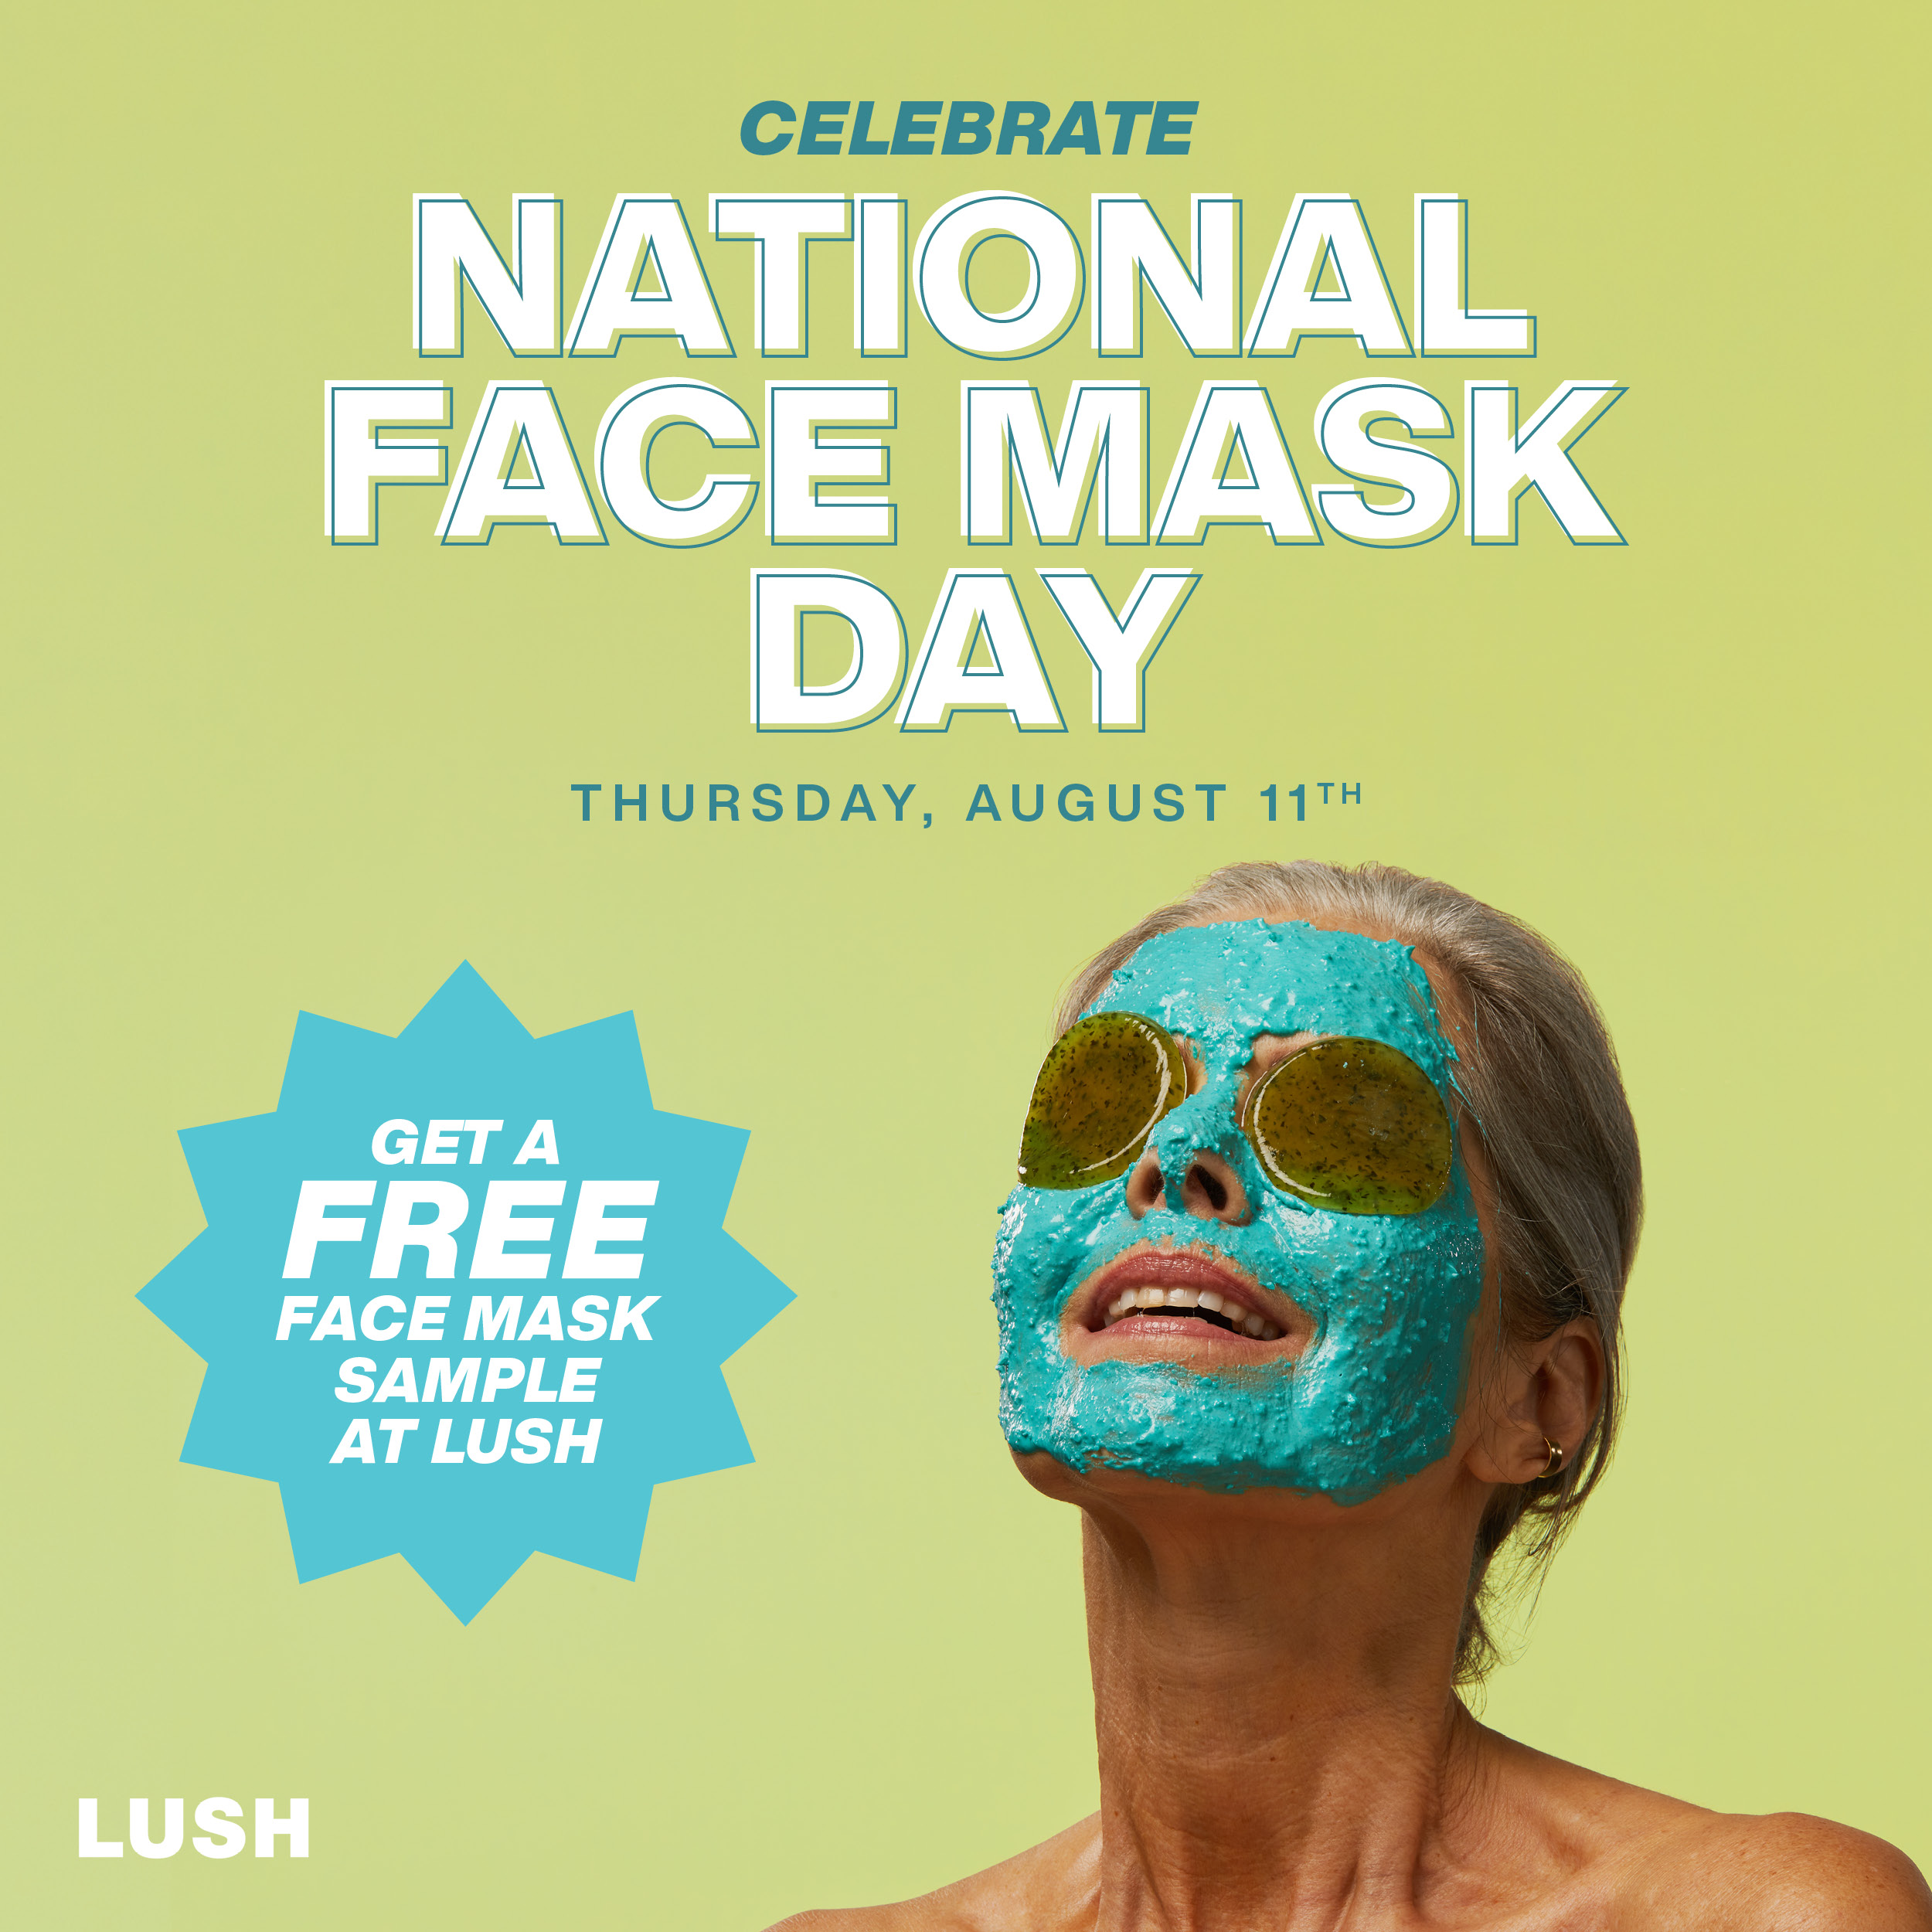 Get a FREE FACE MASK from LUSH